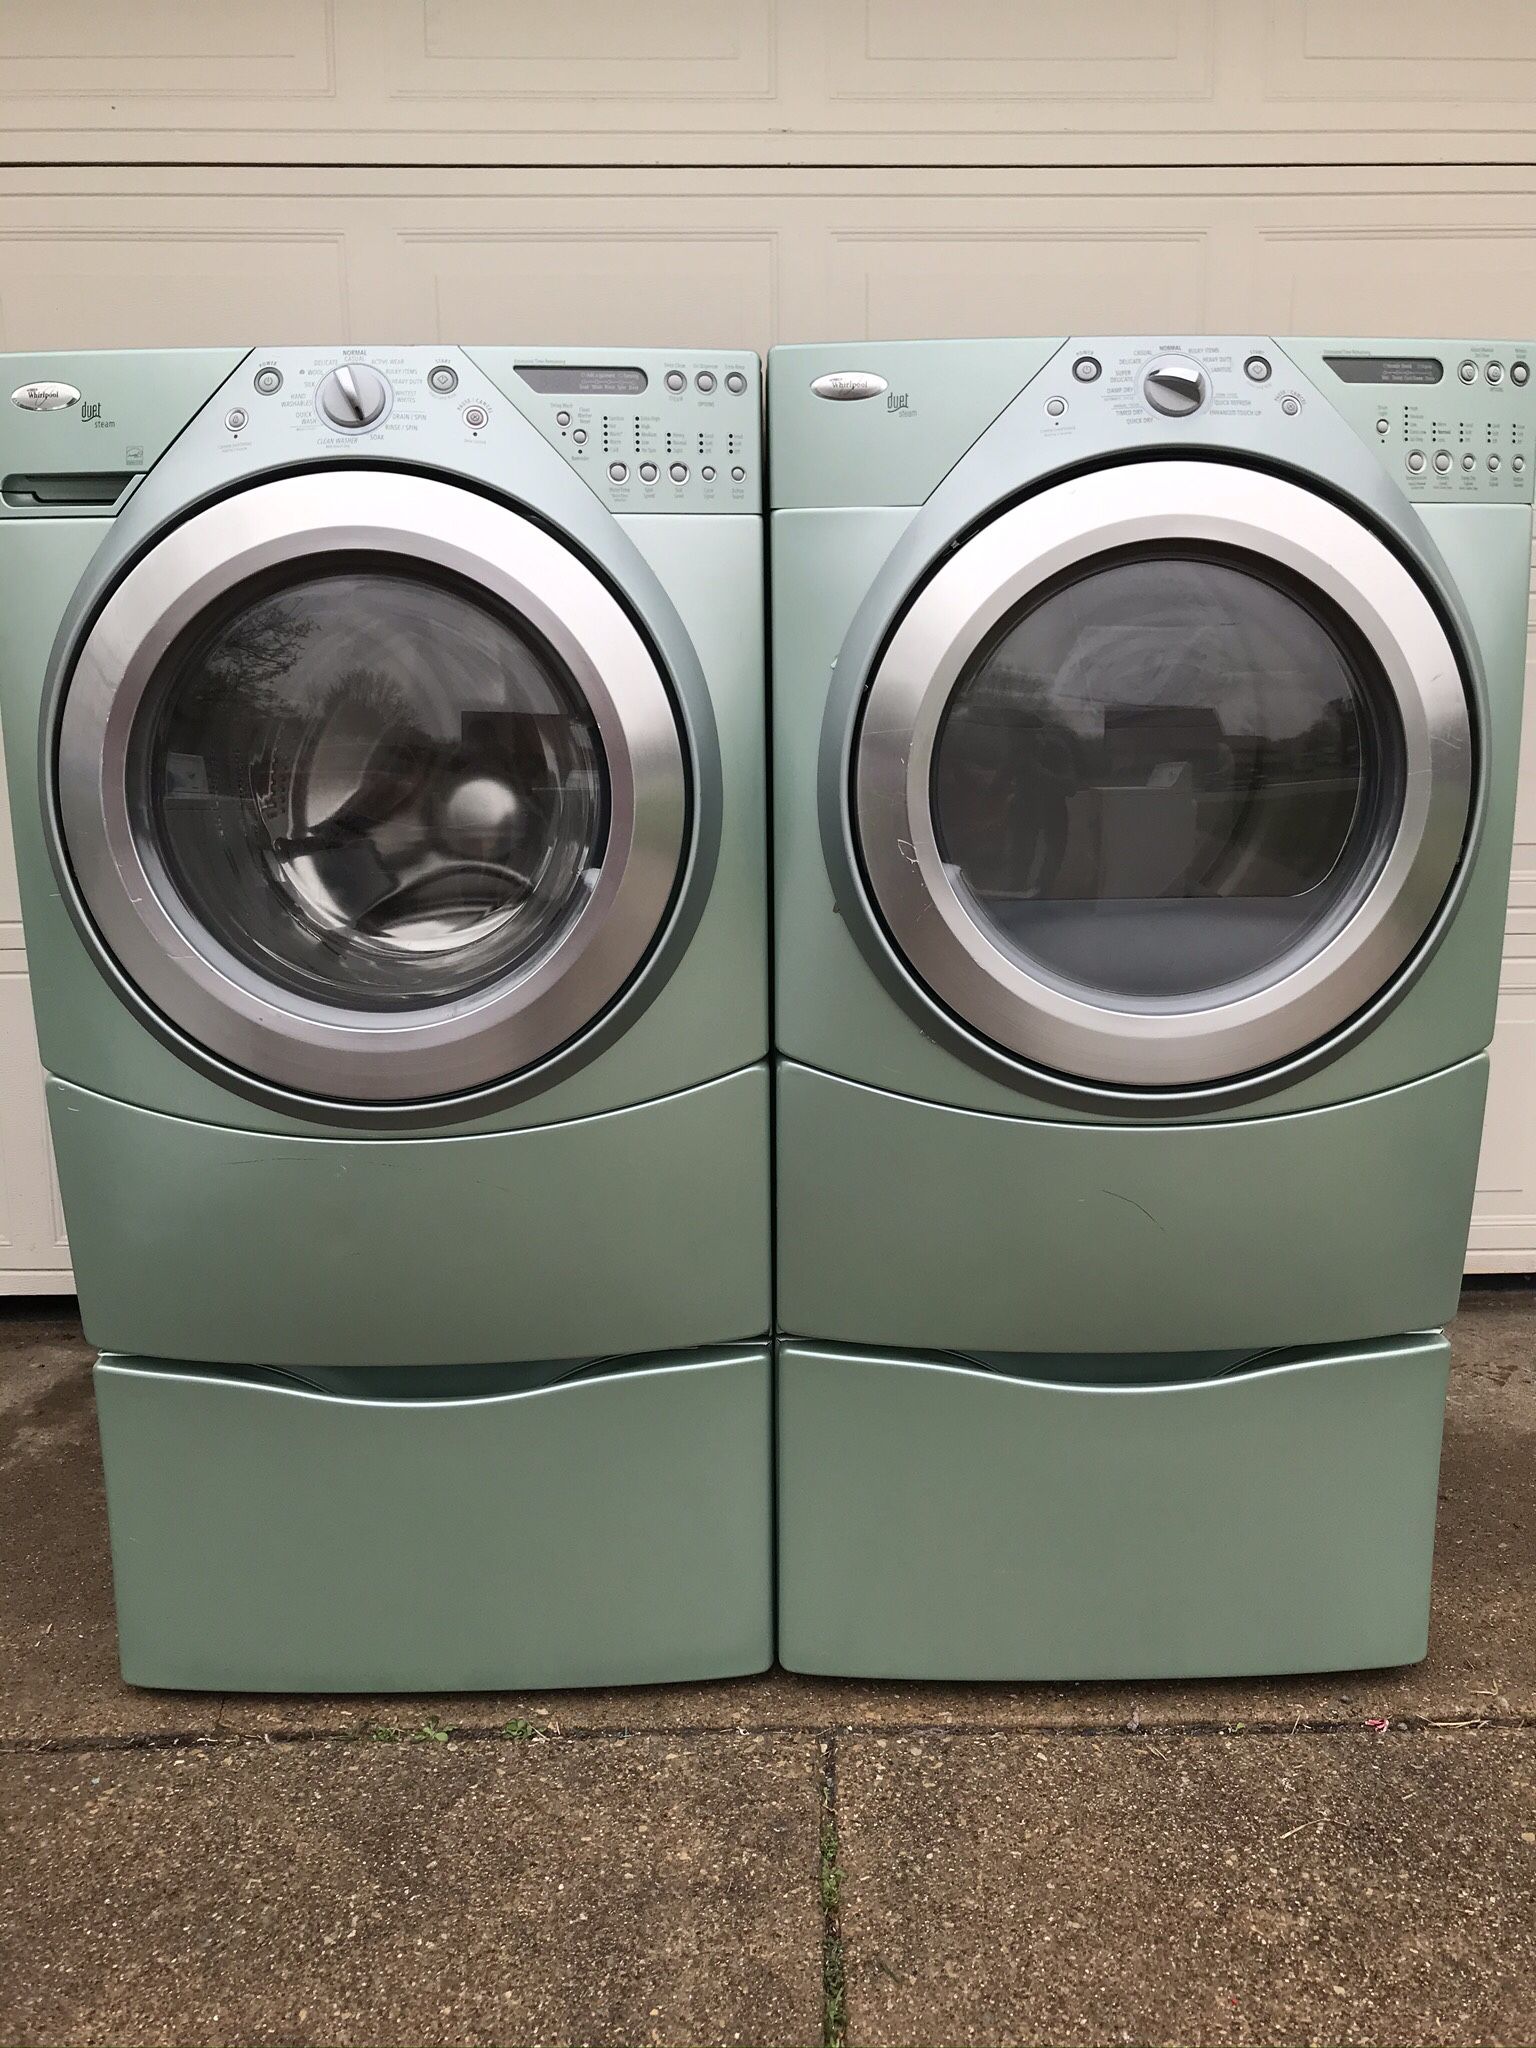 WHIRLPOOL DUET FRONT LOAD WASHER AND ELECTRIC DRYER SET WITH STEAM